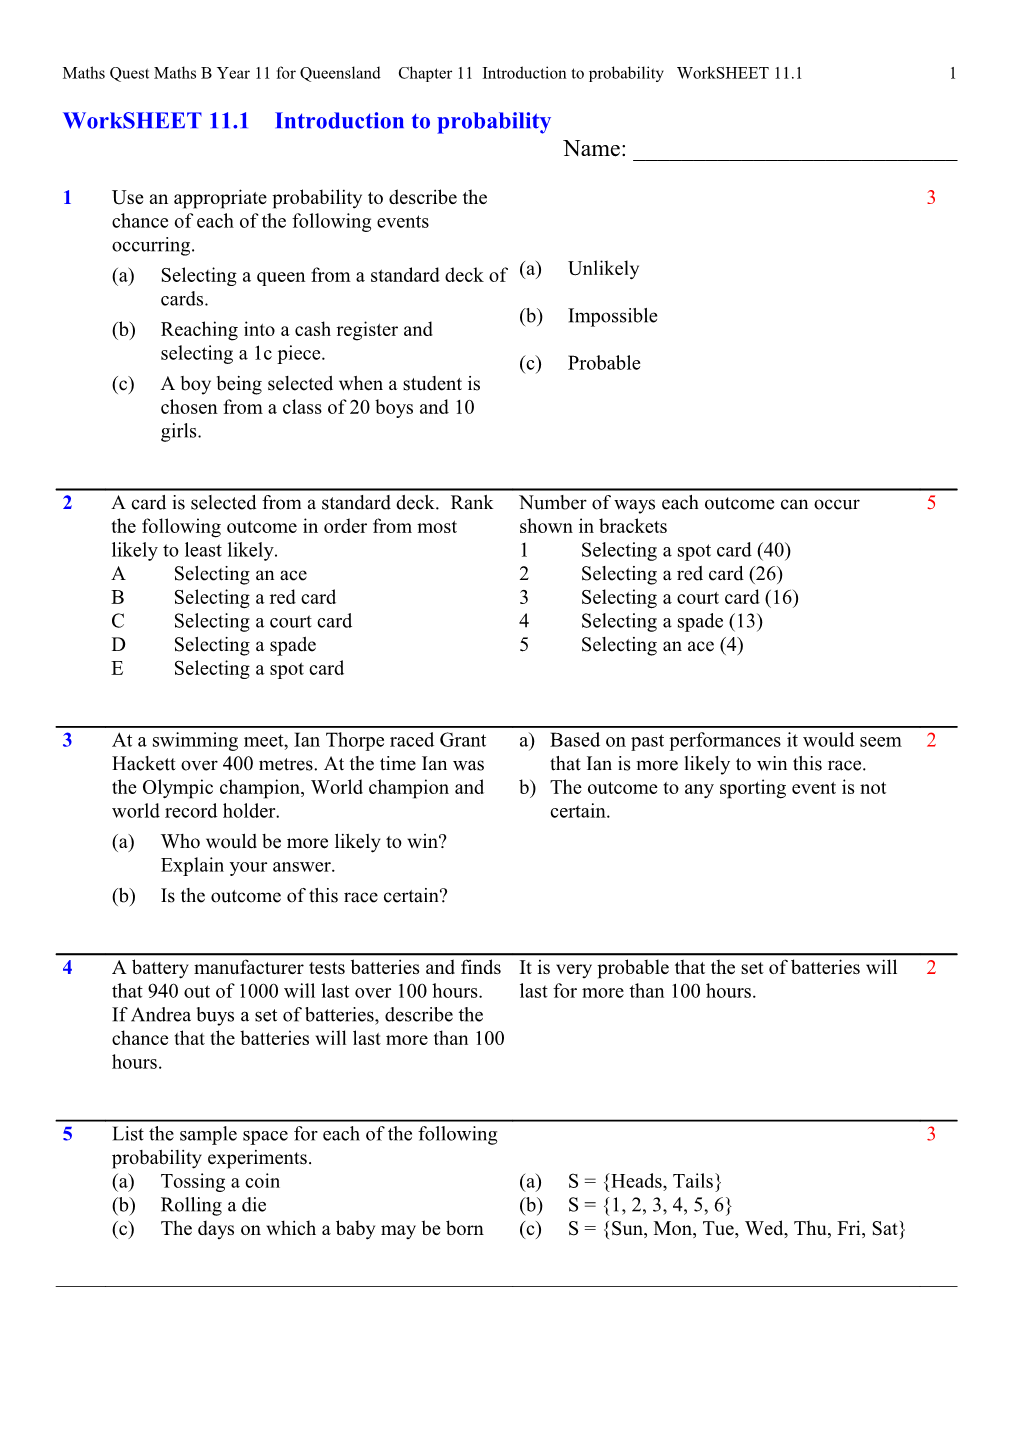 Maths Quest Maths B Year 11 for Queensland Chapter 11 Introduction to Probability Worksheet